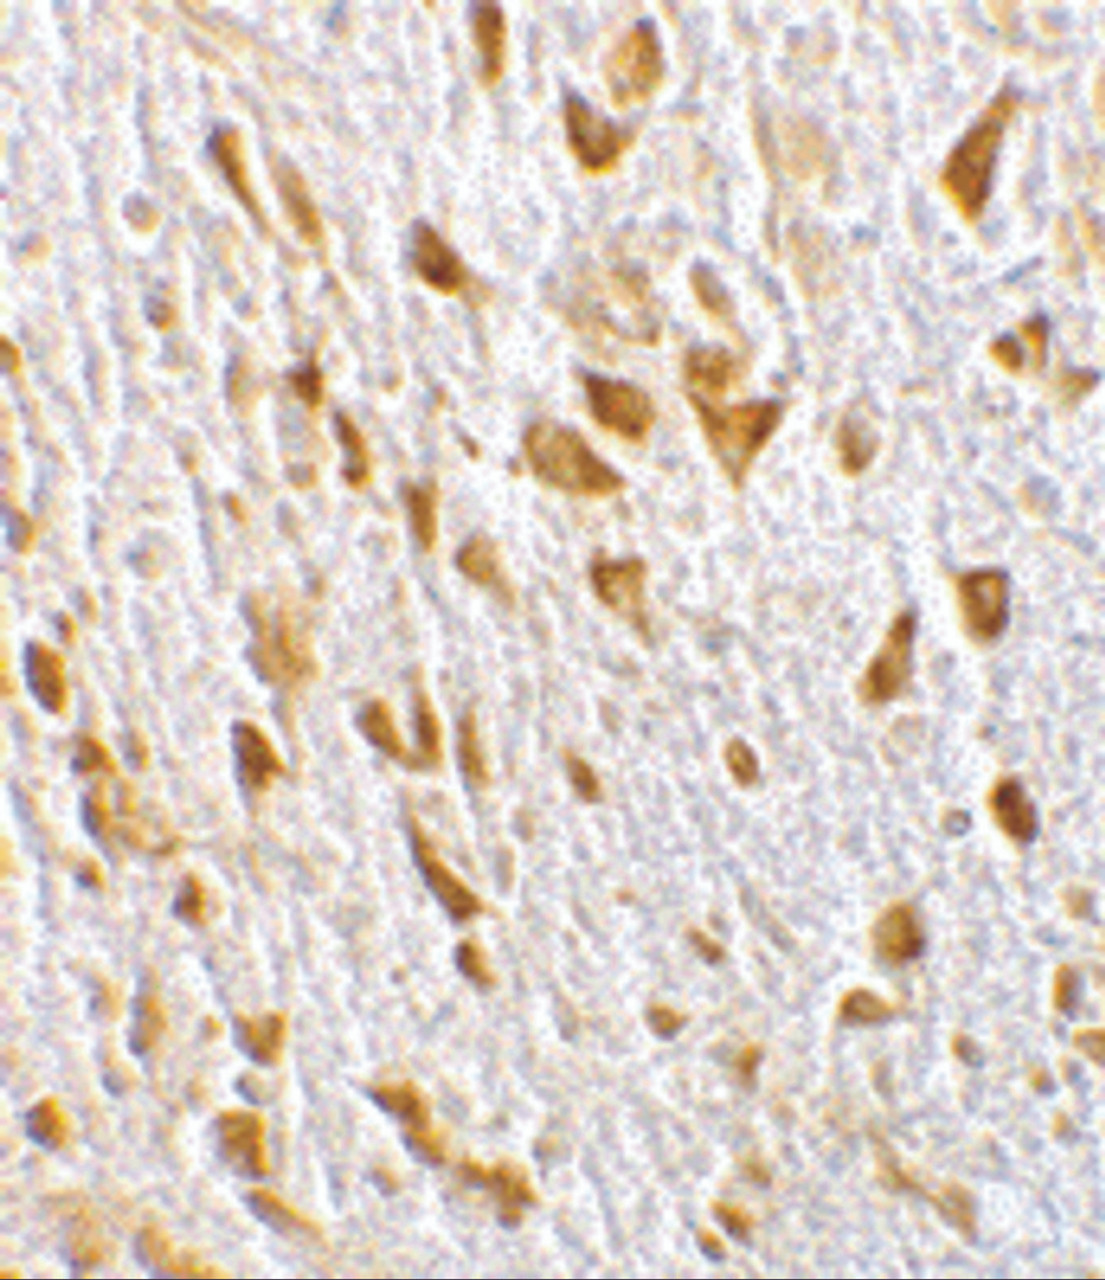 Immunohistochemistry of PIKE in mouse brain tissue with PIKE antibody at 10 ug/mL.